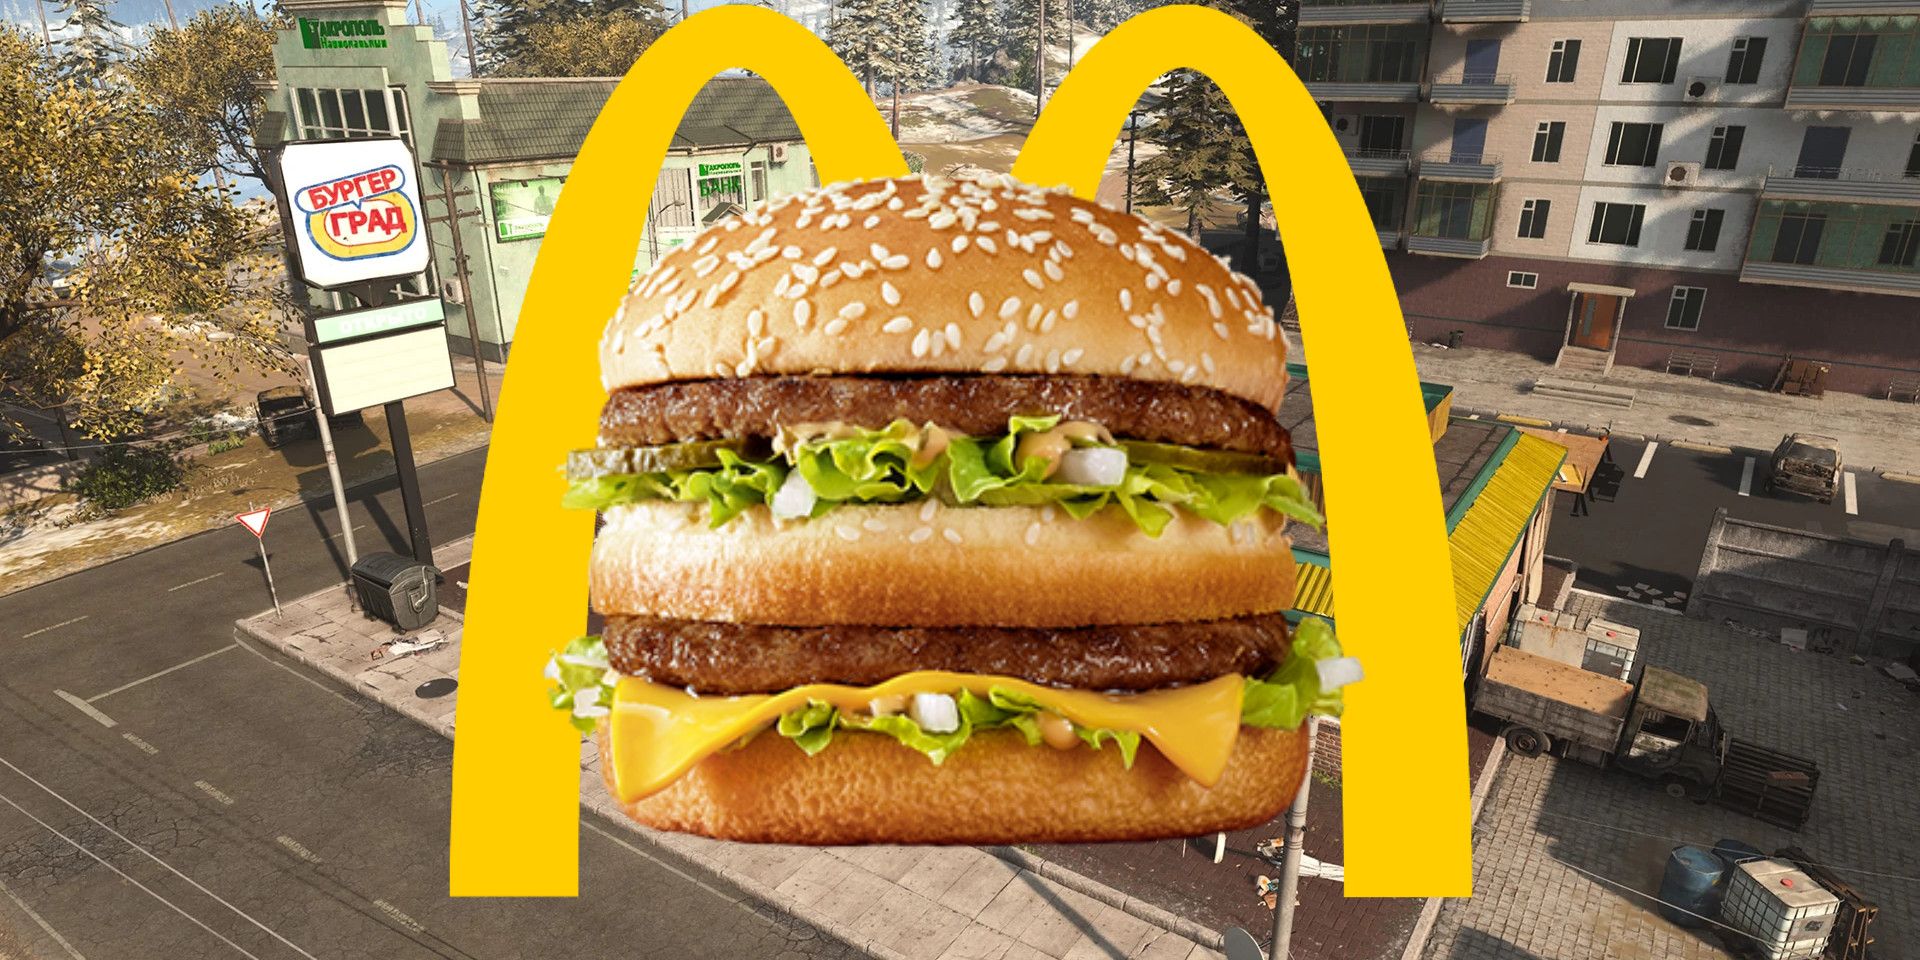 The McDonald's logo and a Big Mac in front of the Verdansk Burger Town from Call of Duty Warzone